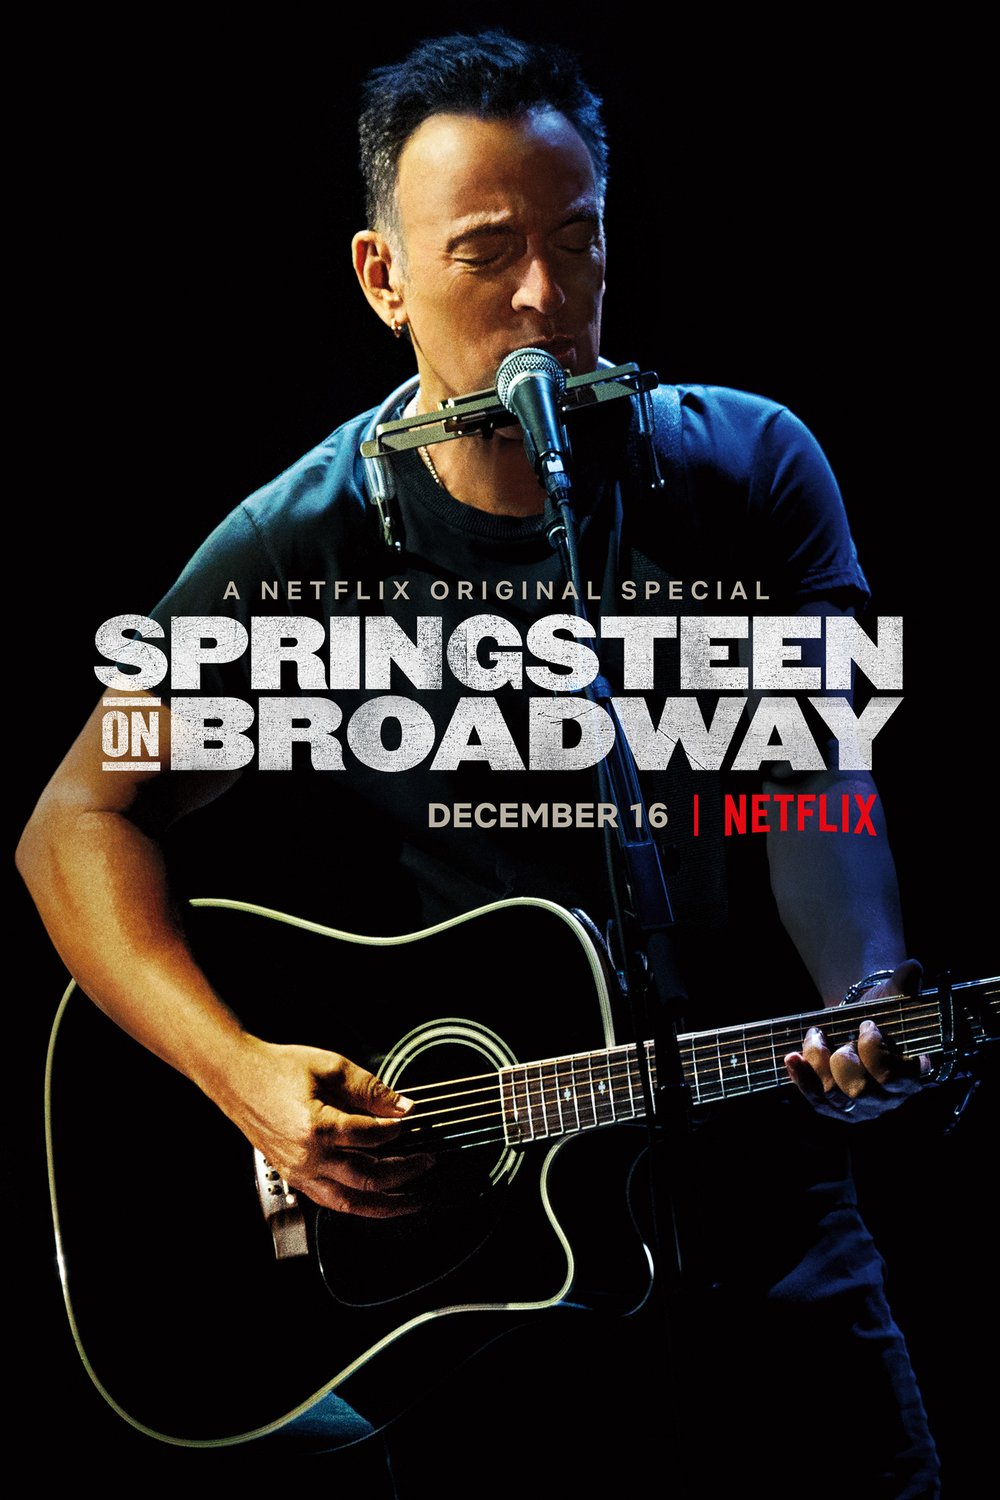 Poster of the movie Springsteen on Broadway